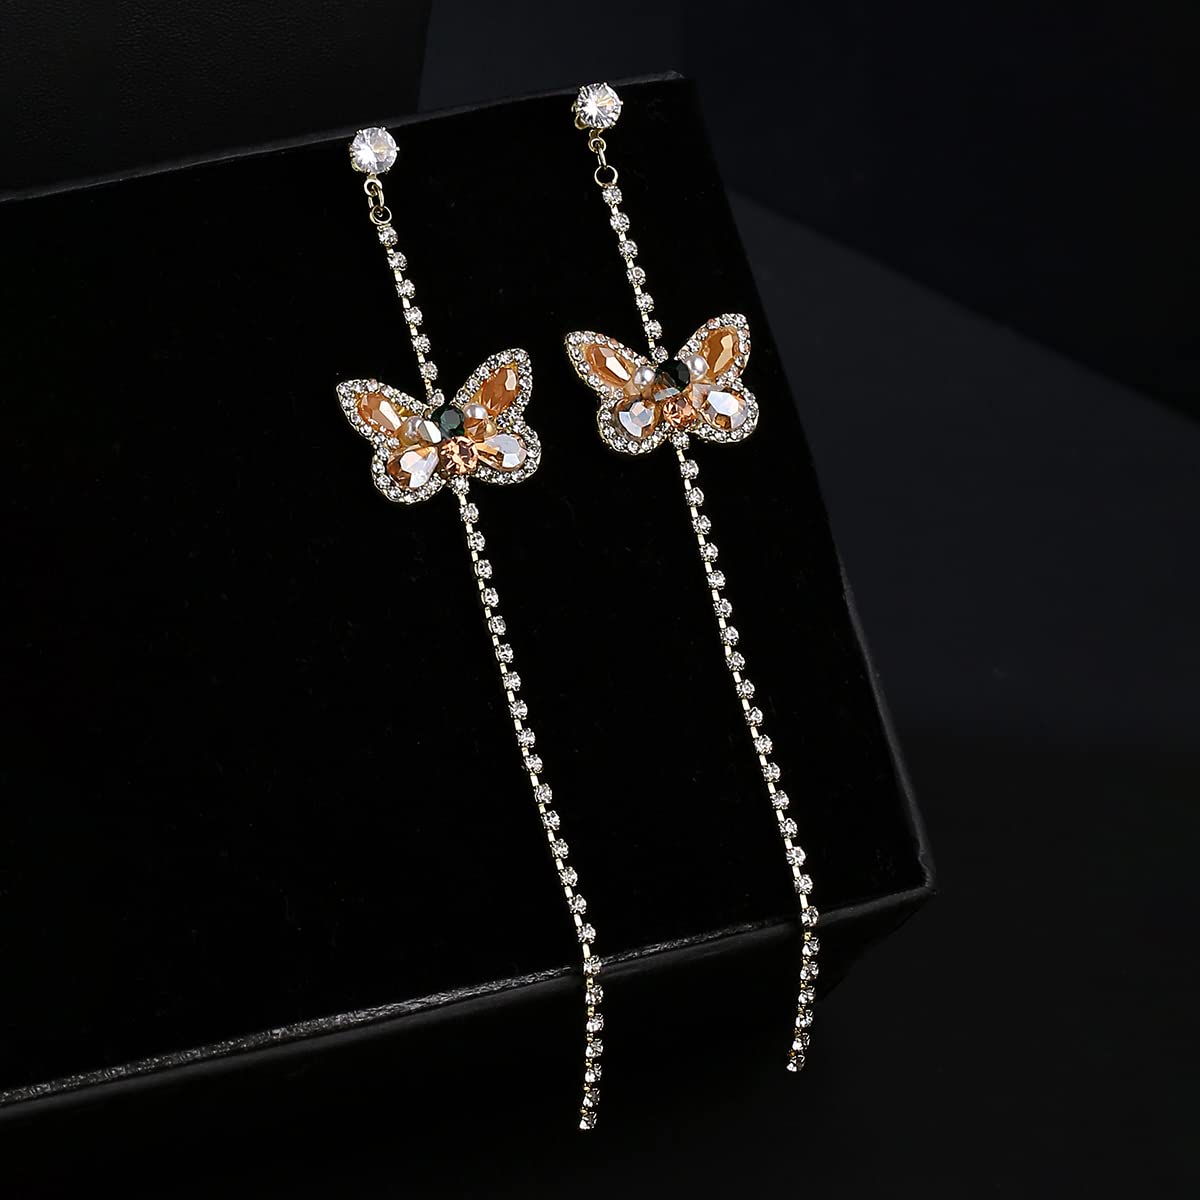 Yellow Chimes Earrings For Women Gold Tone Crystal Long Chain With Butterfly Stud Dangle Earrings For Women and Girls